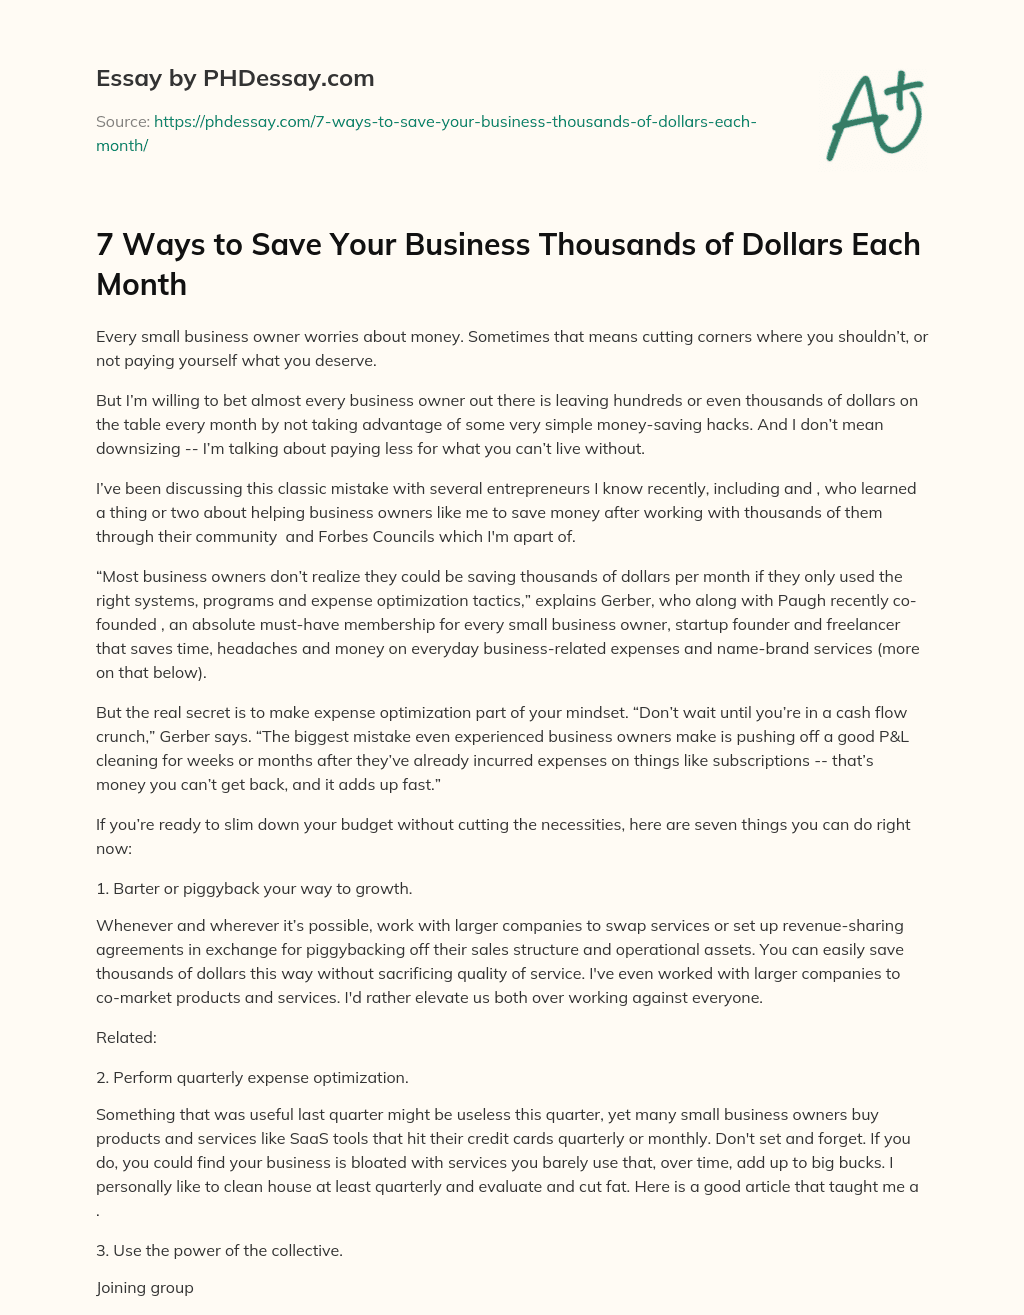 7 Ways to Save Your Business Thousands of Dollars Each Month essay